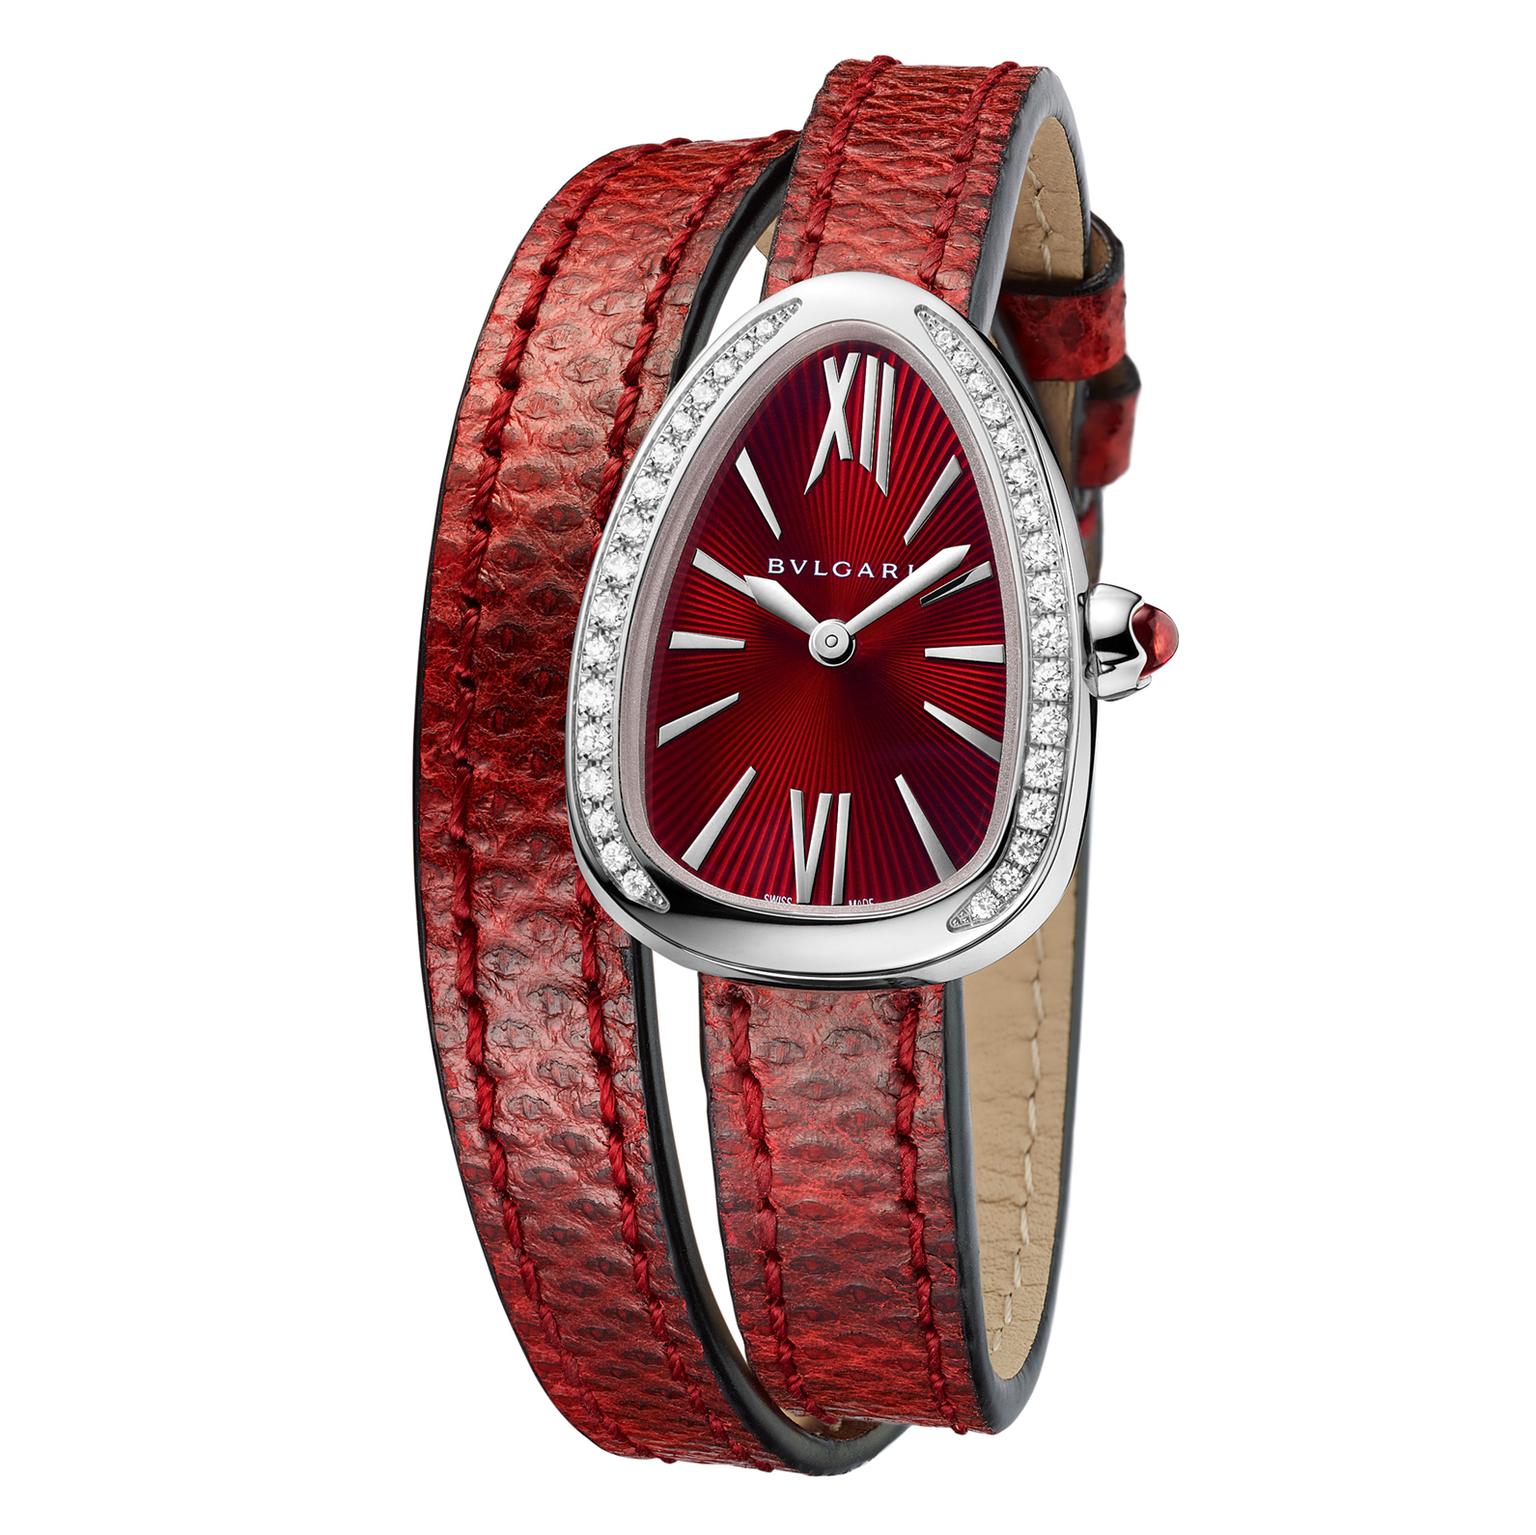 Bulgari Serpenti watch in steel with diamonds and red dial